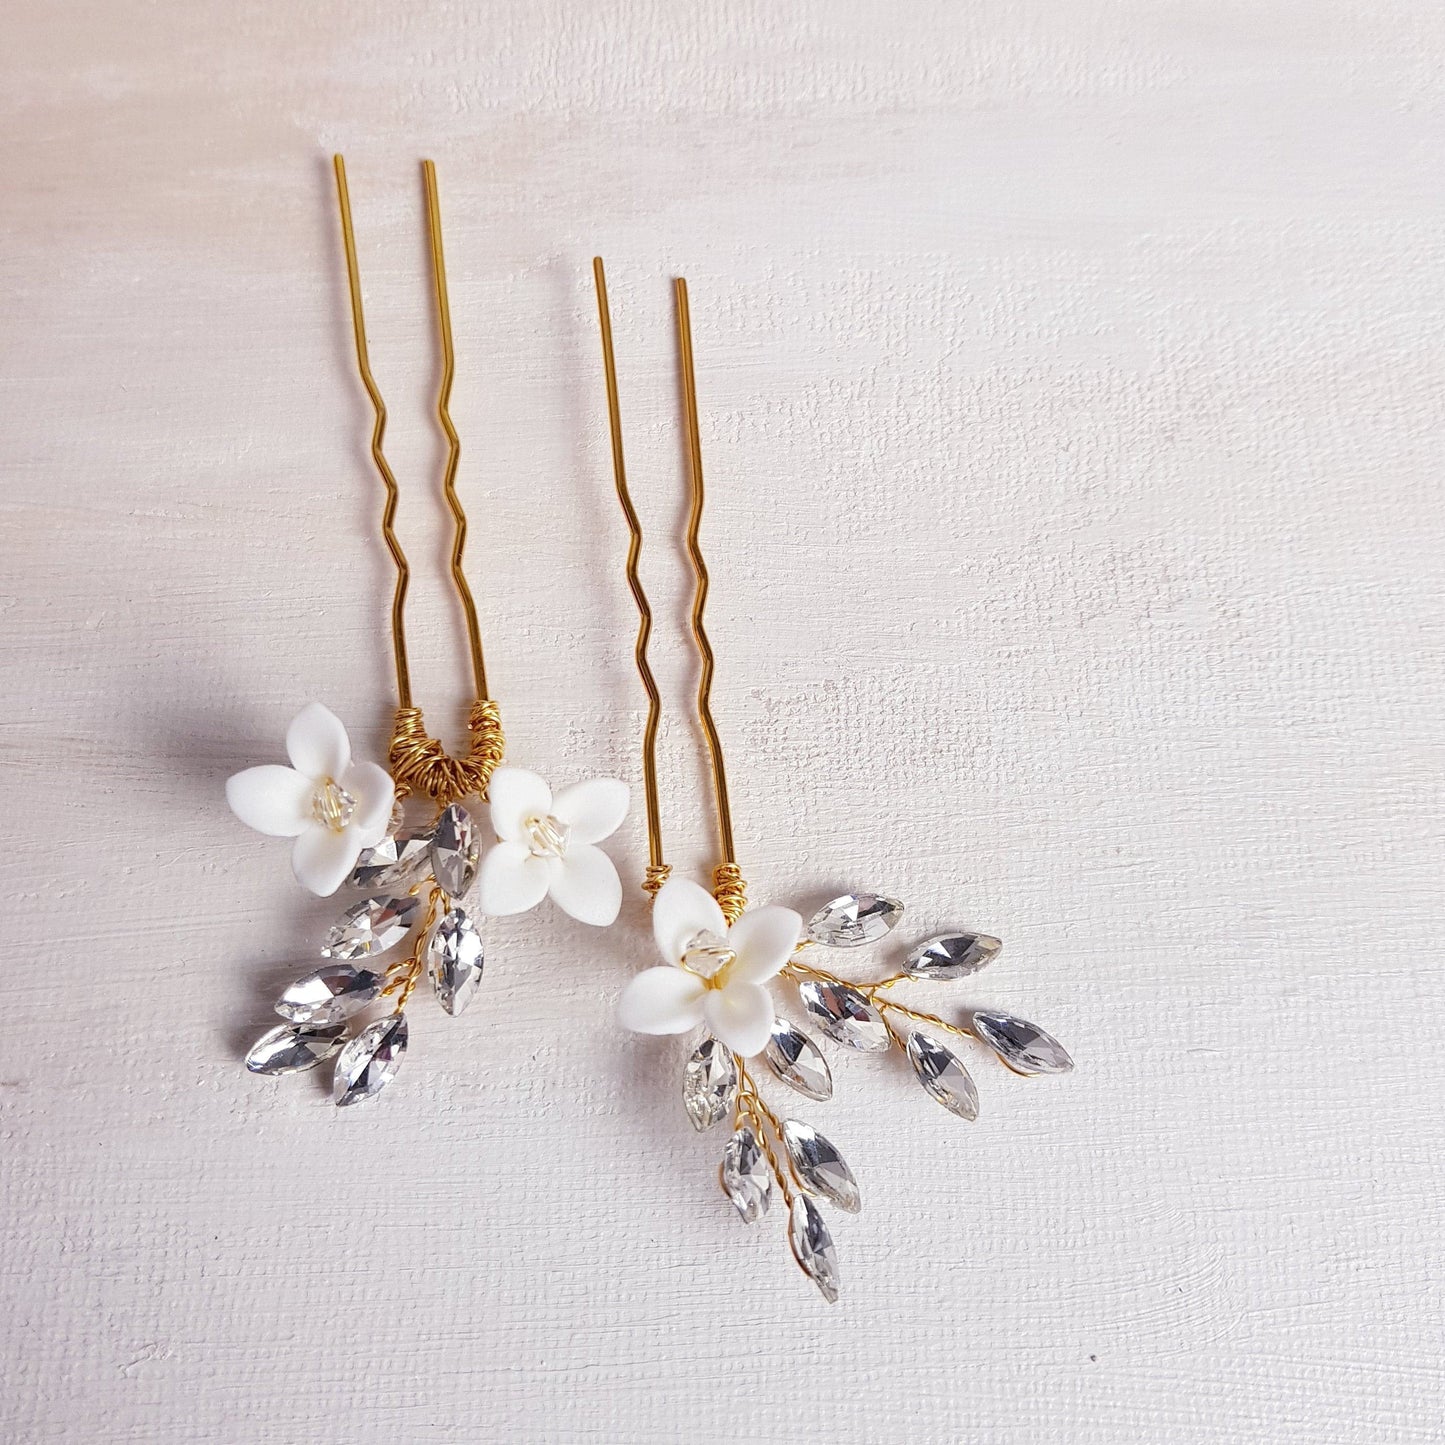 BOUTIQUEBYBRENDALEE FEUILLES BLING Hair U Pins set of 2 Small White Flowers Hairpins crystal beads Bridal Wedding Hair Pin Accessories